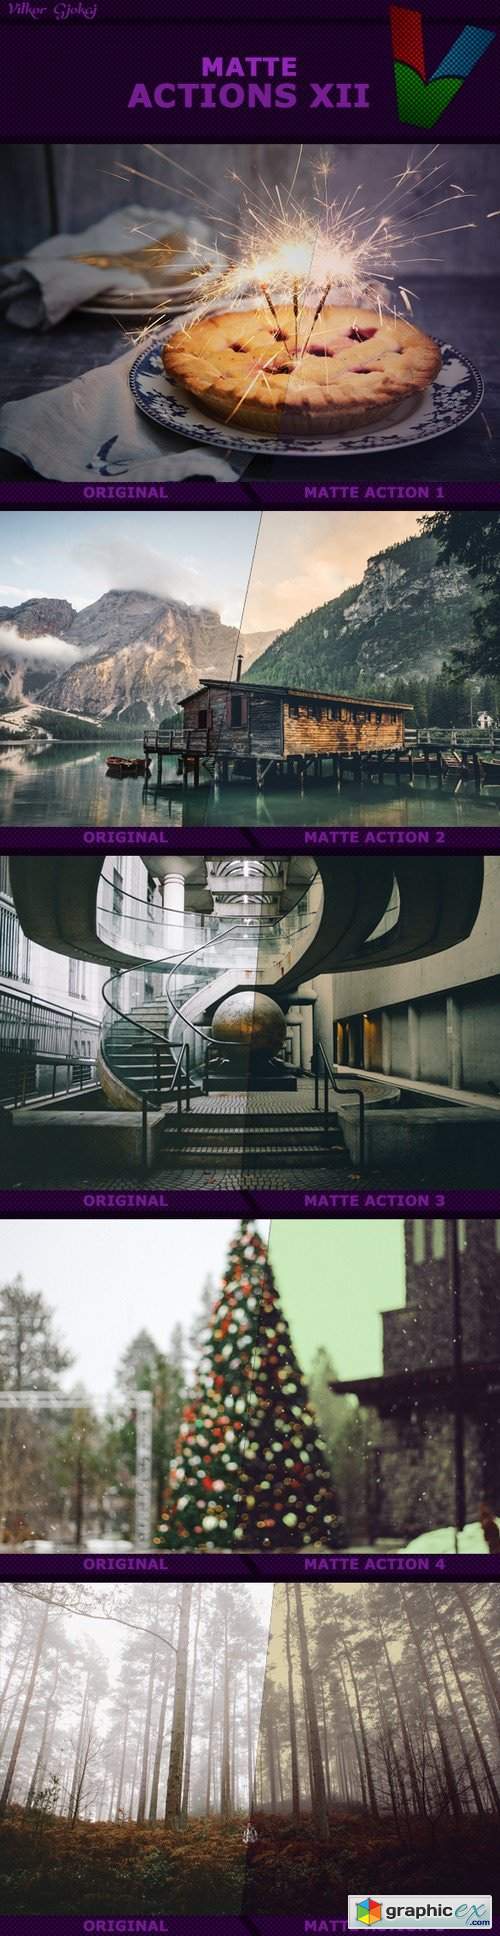 Matte Actions XII